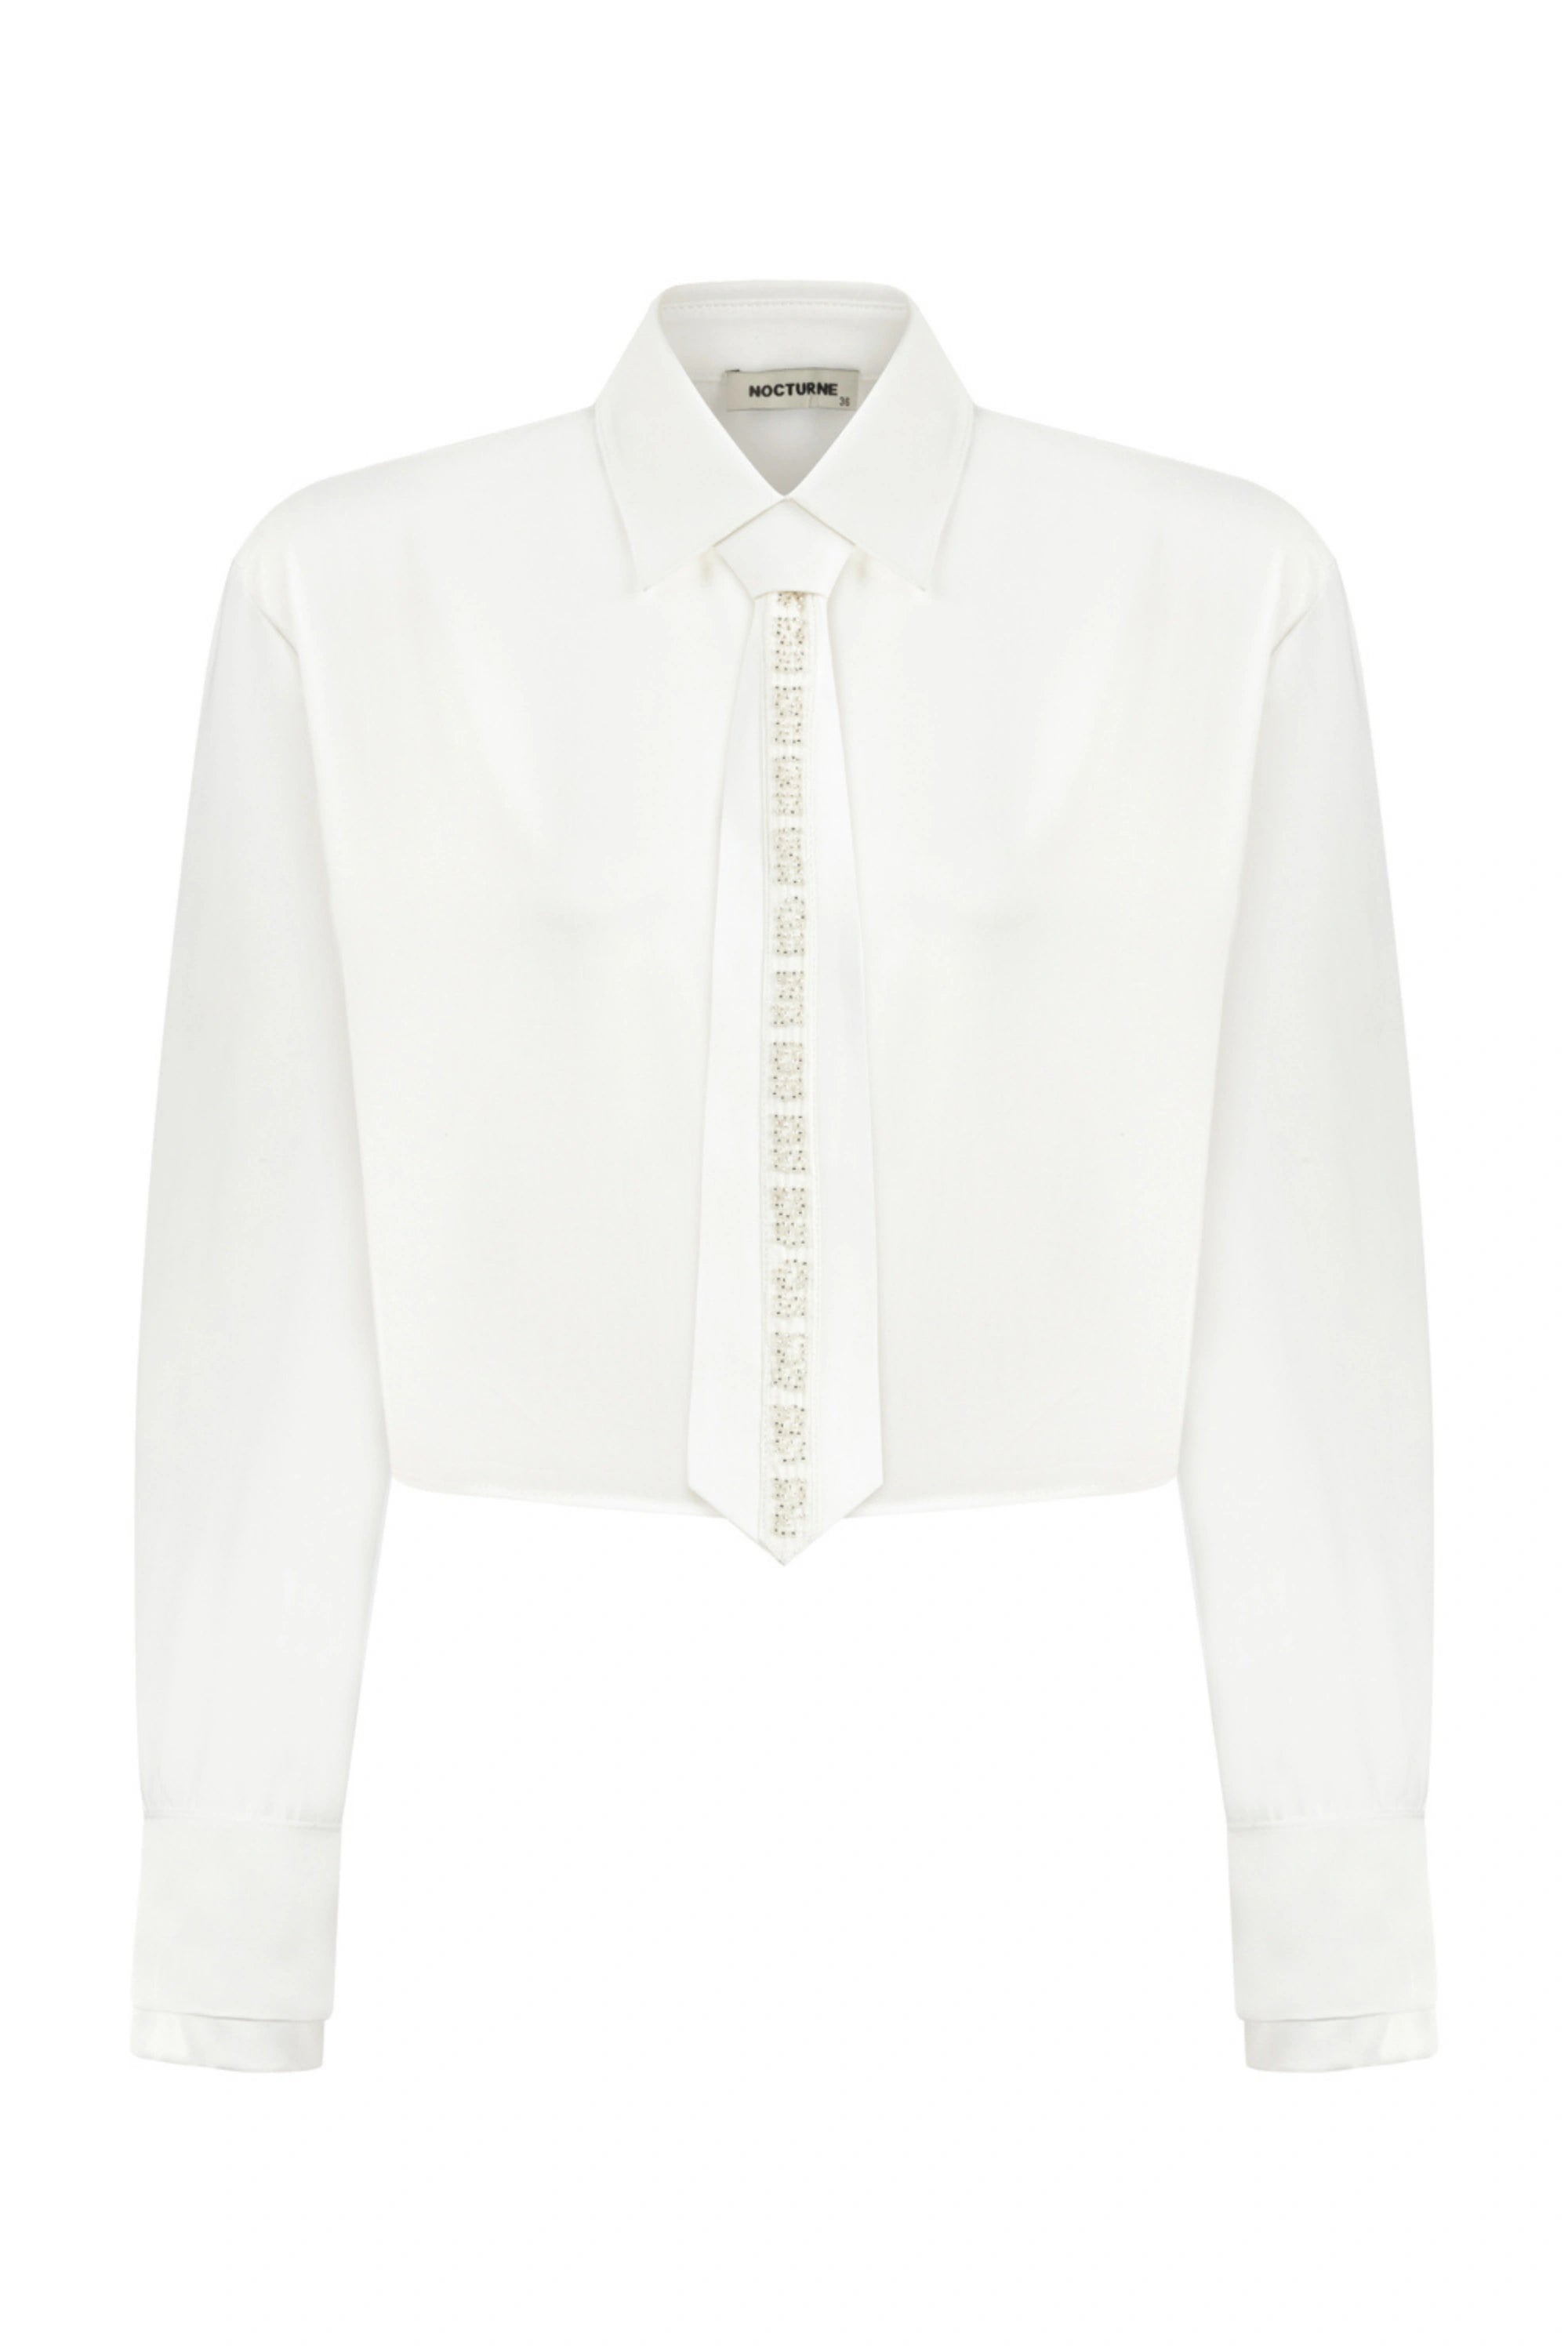 Nocturne Women's White Shirt With Tie Detail